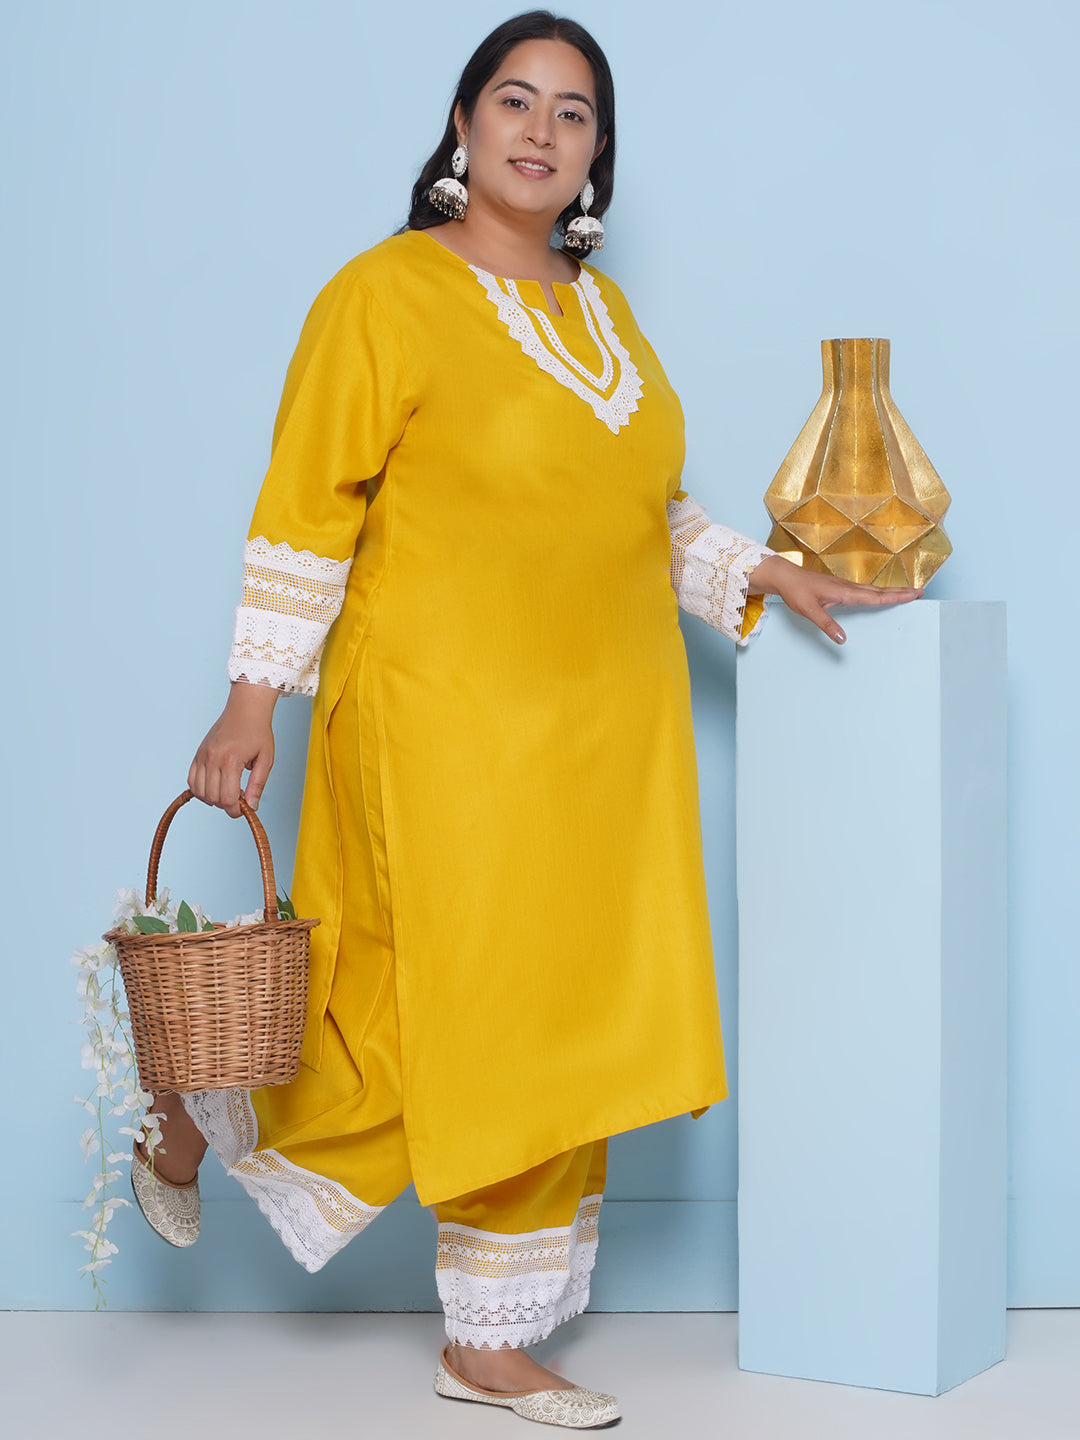 Yellow color kurta with lace detailing on sleeves and neck